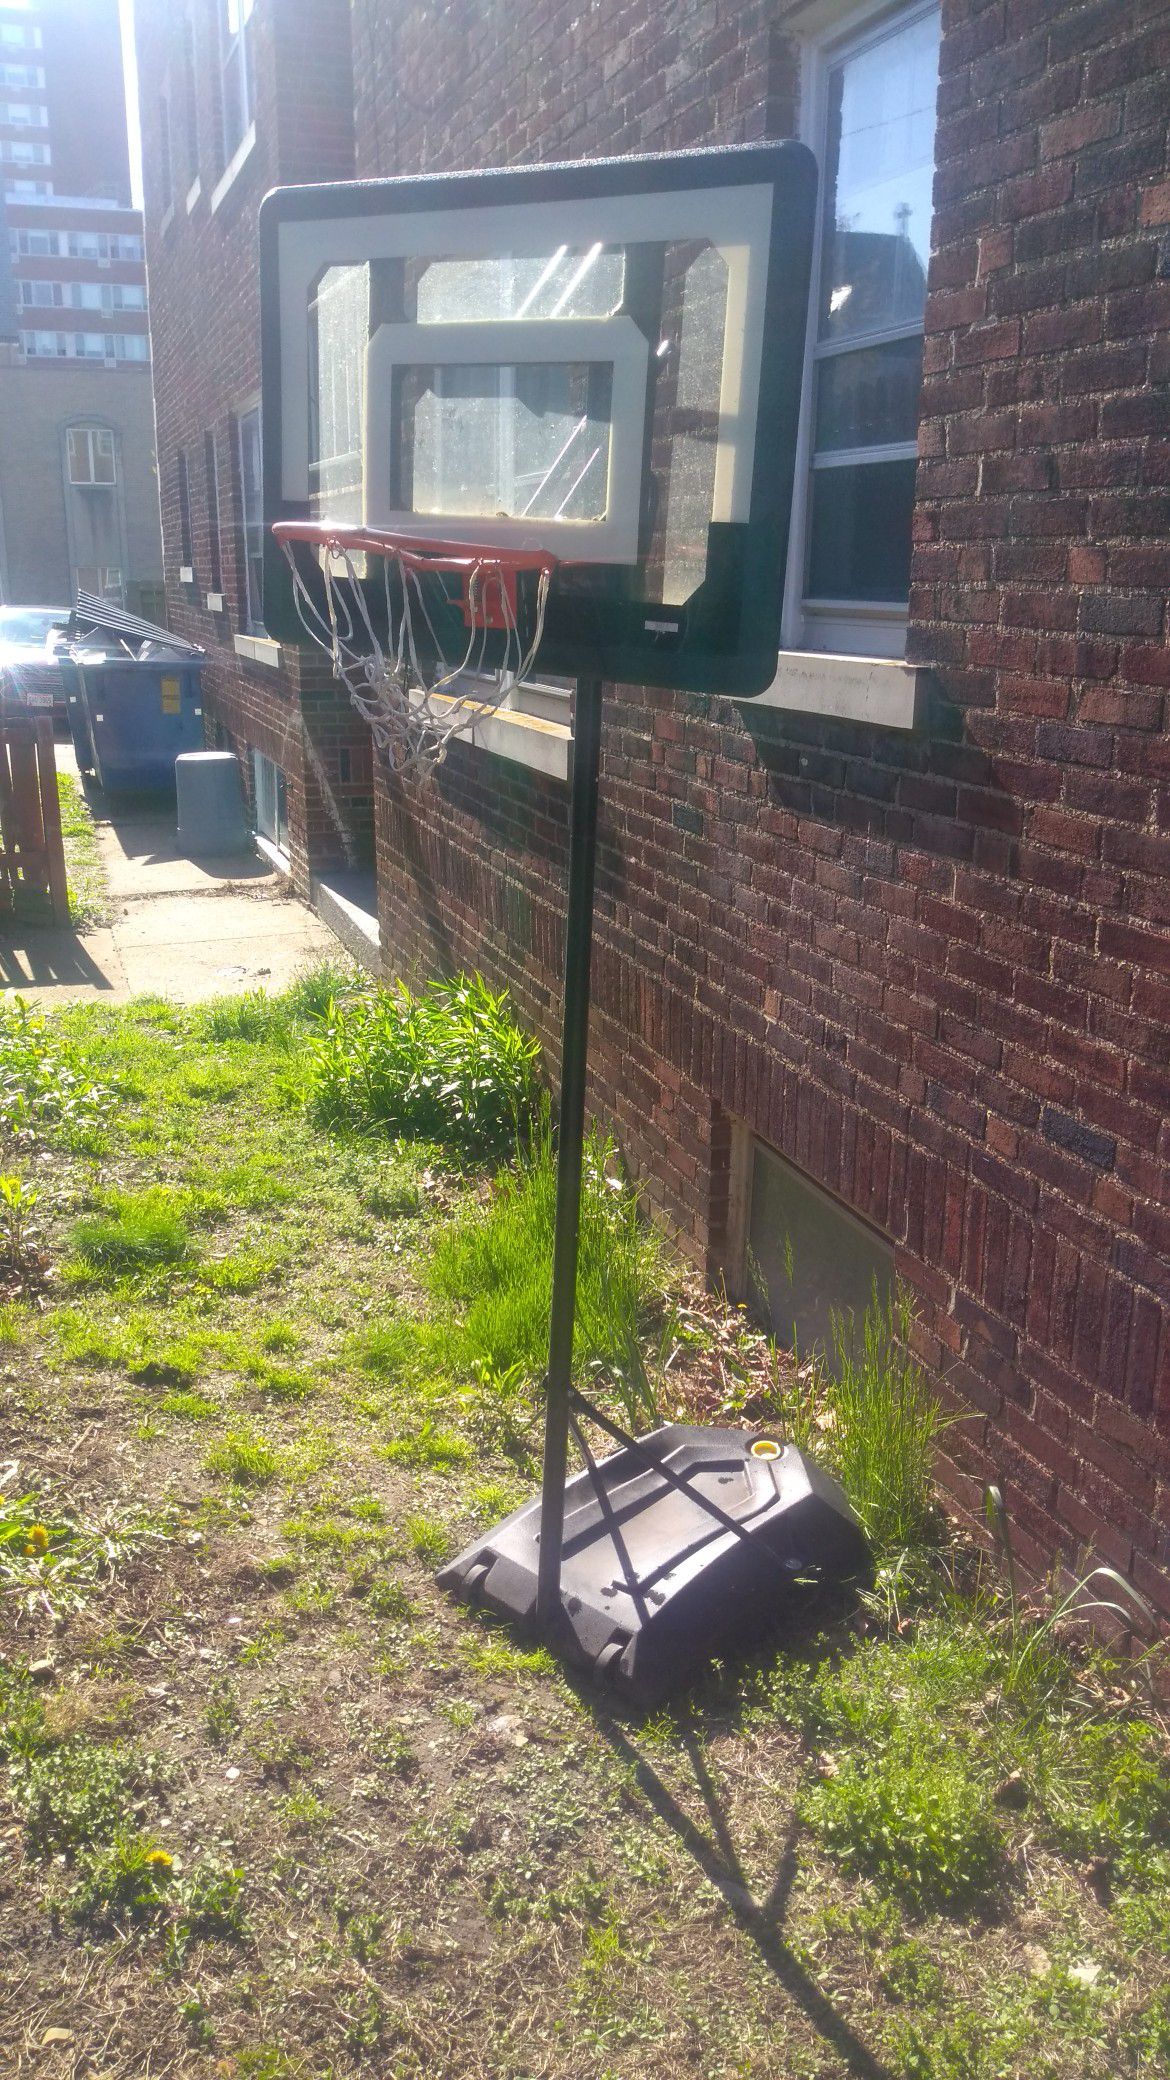 A solid Metal Basketball hoop good condition used. Need s a Hoop. I am in Lakewood Ohio. Solid Metal